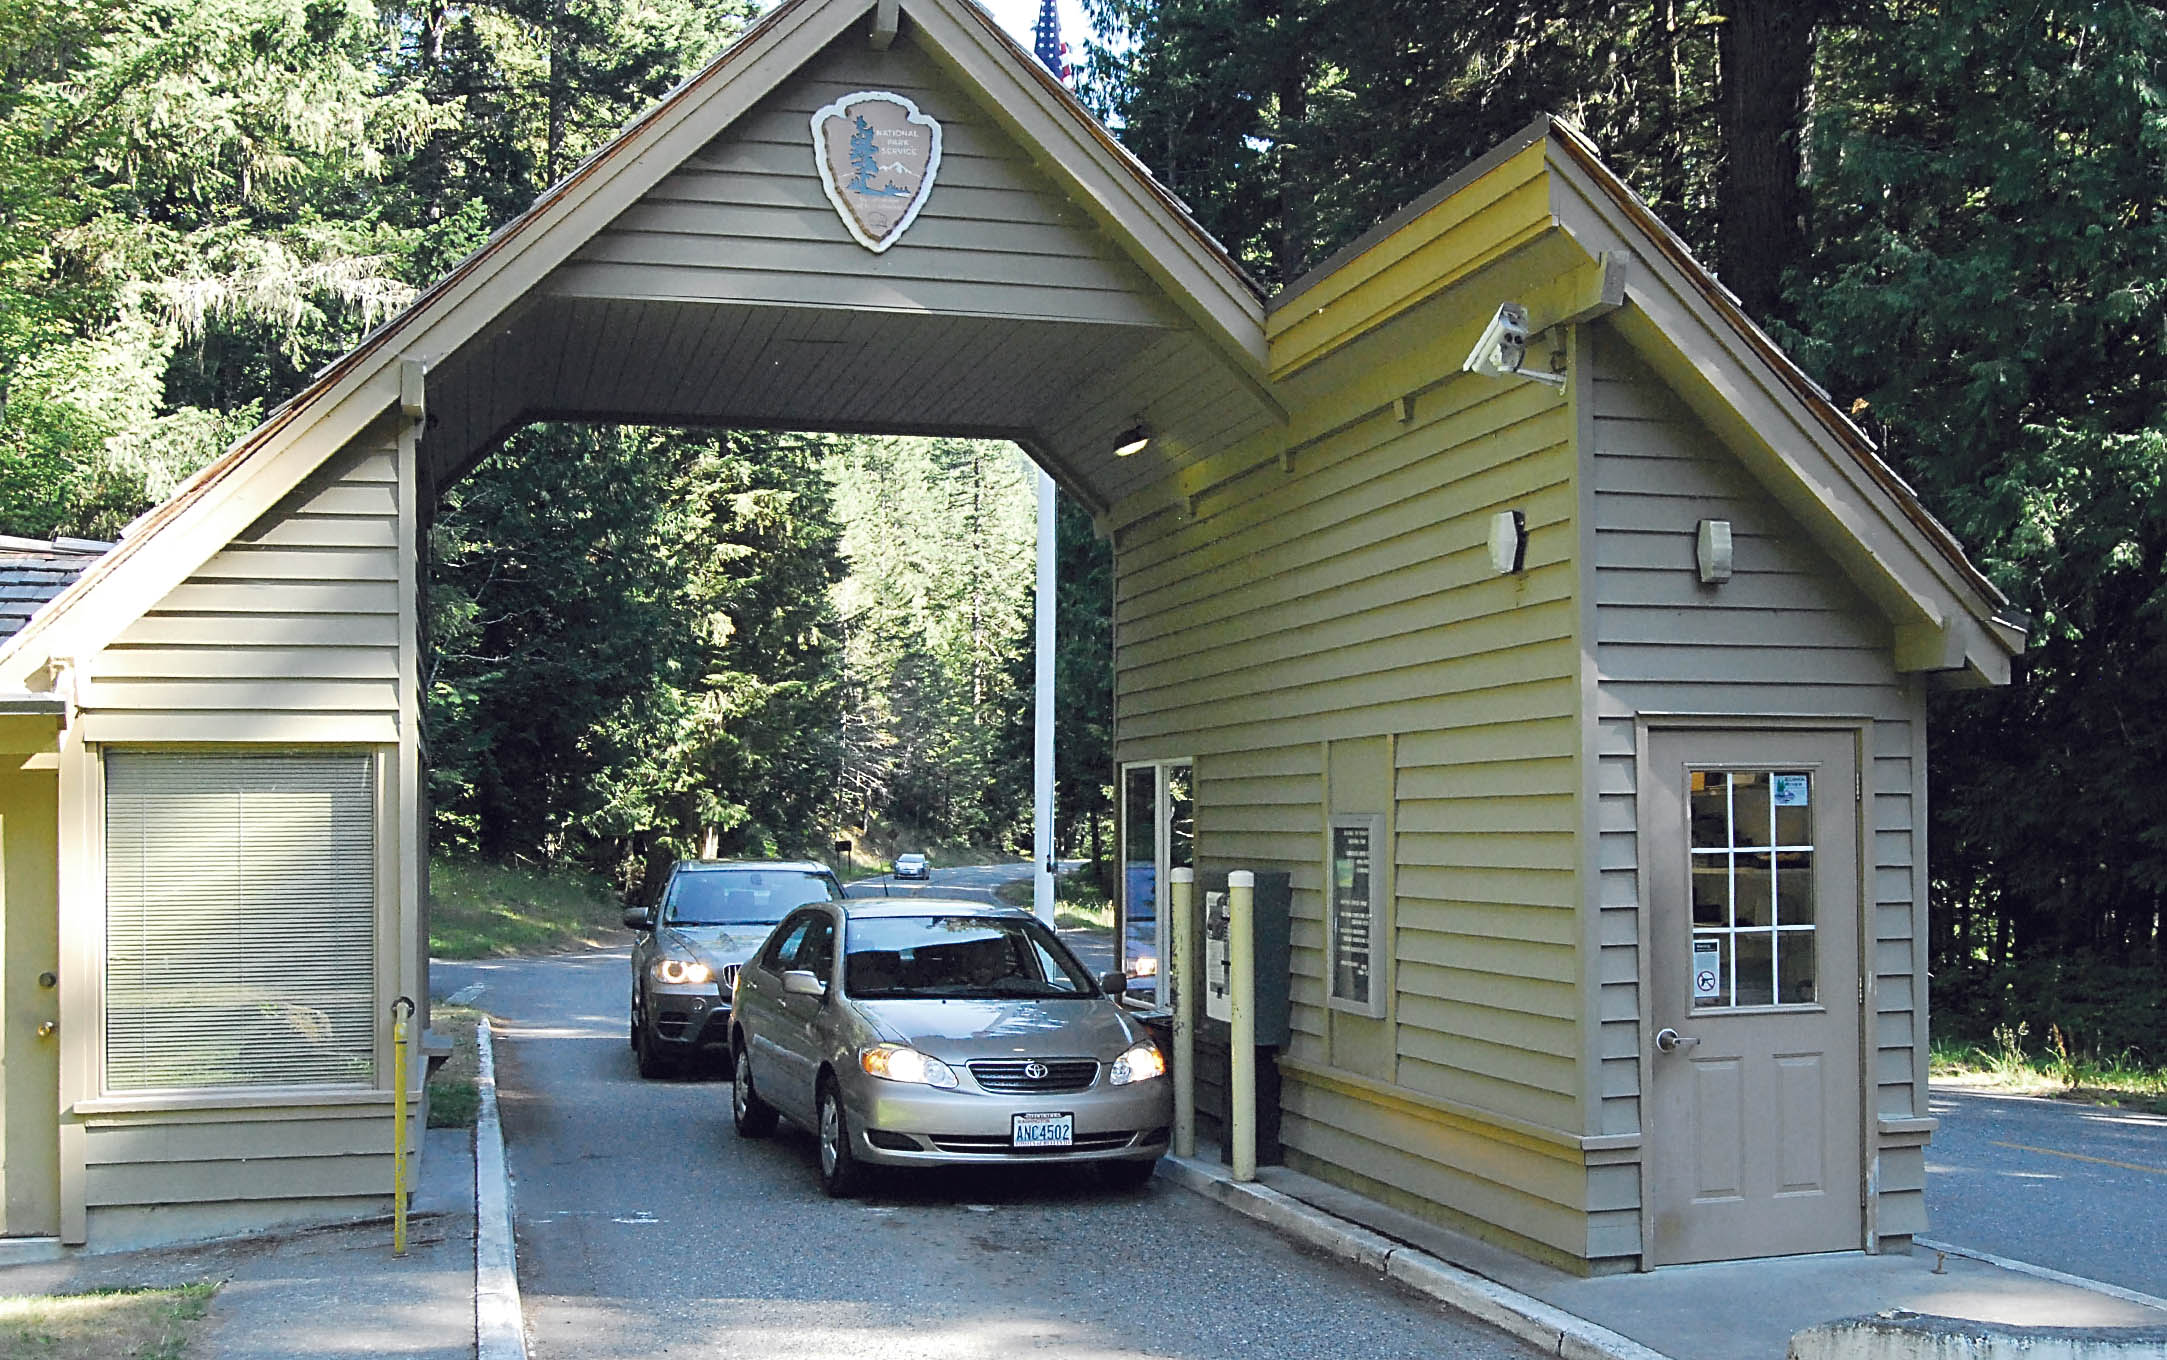 Visitors enter Olympic National Park through the Heart o' the Hills entrance station south of Port Angeles. Photo by Keith Thorpe/Peninsula Daily News